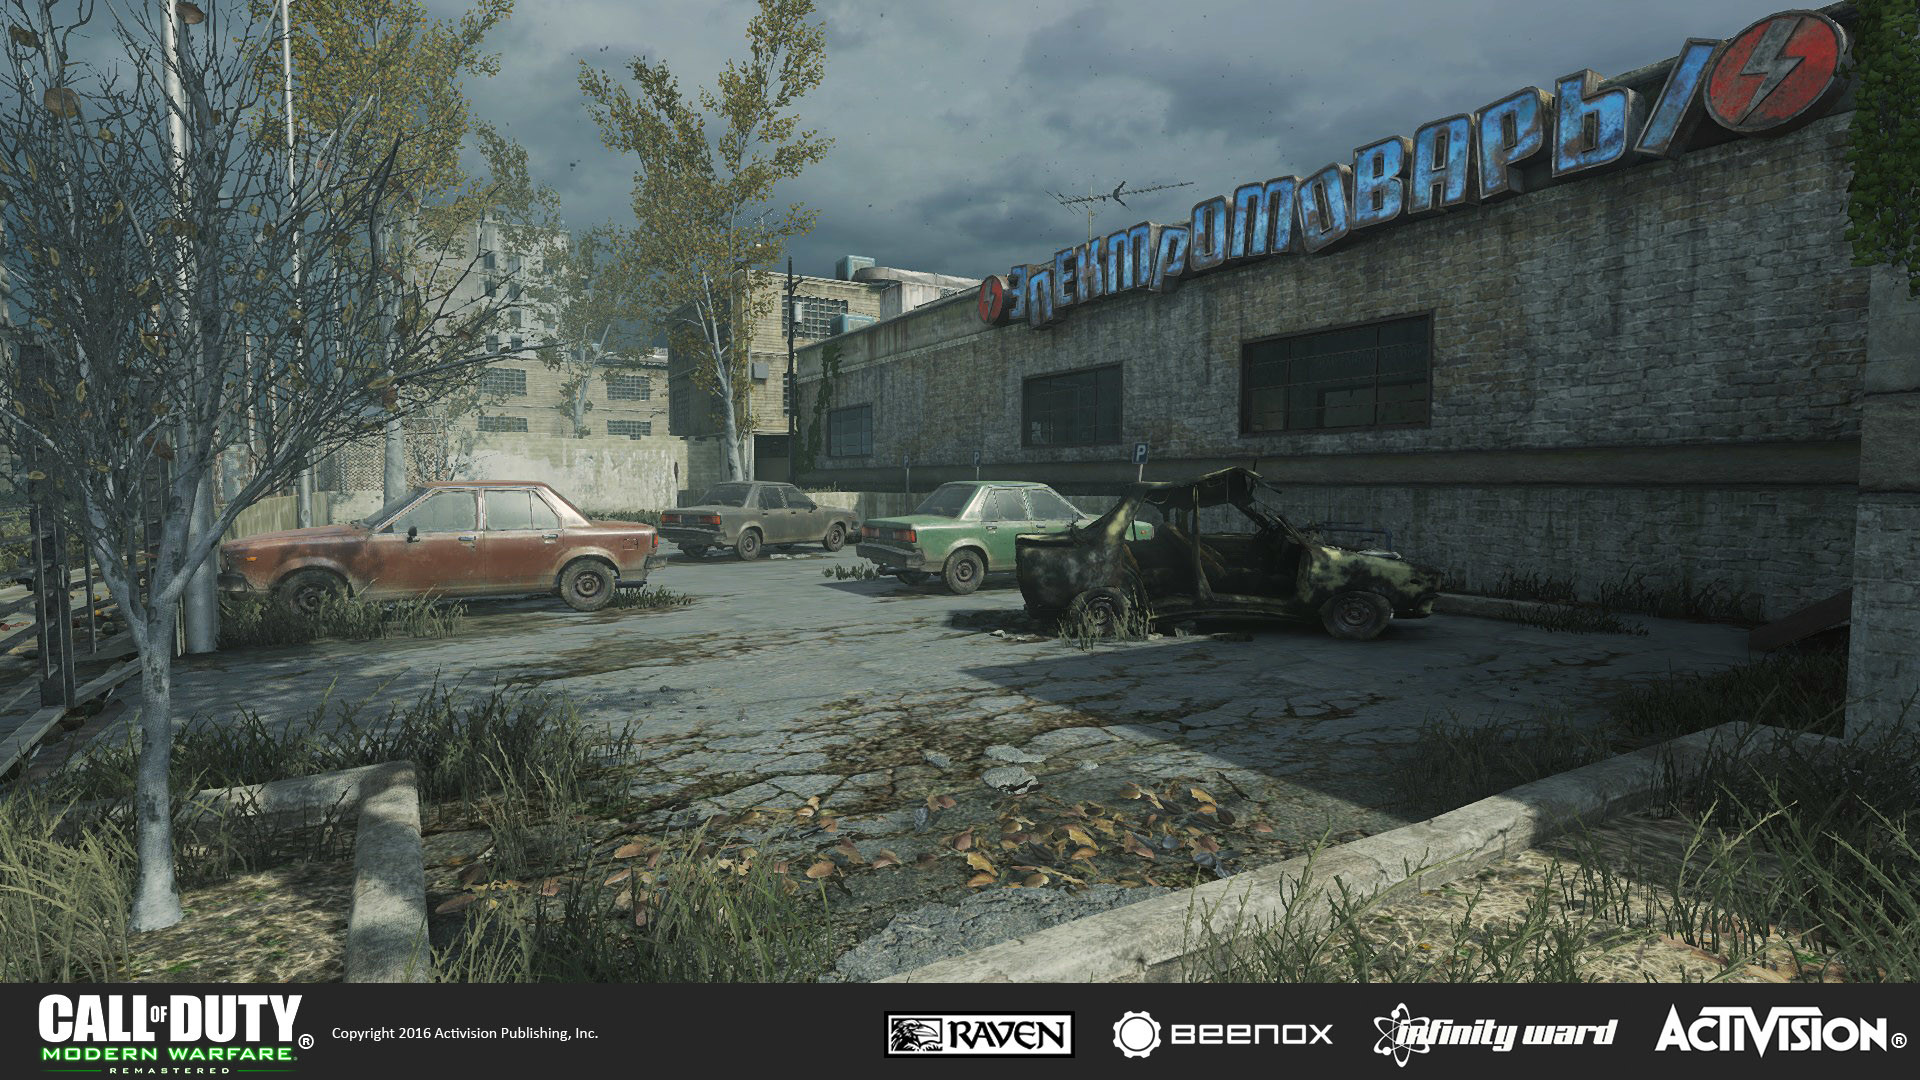 Will Petrosky - Call of Duty: Ghosts Multiplayer Map - Octane